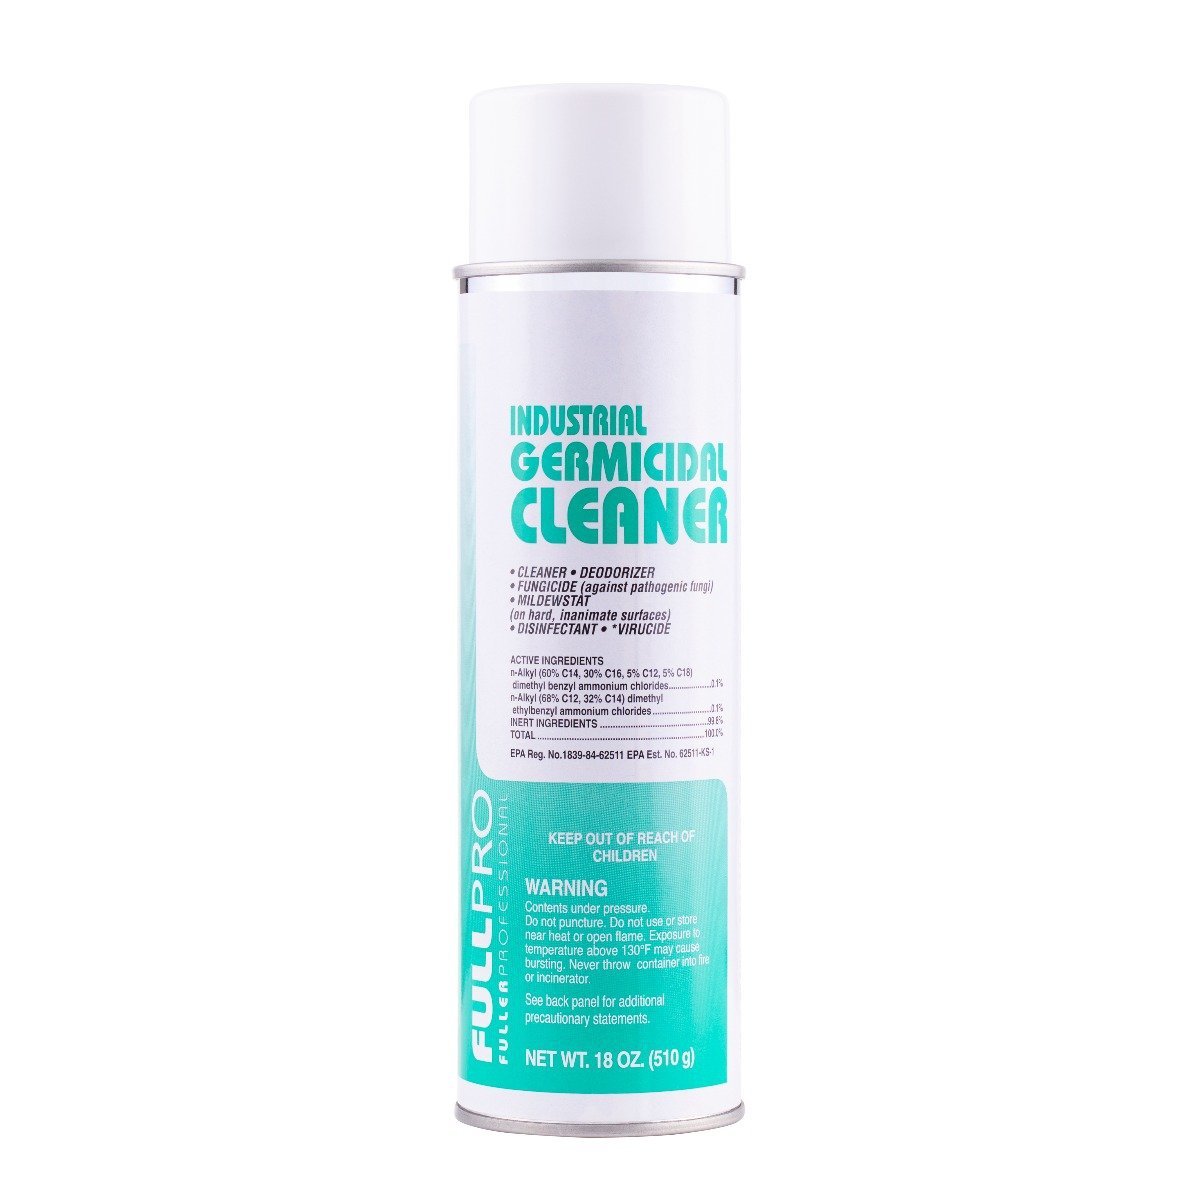 Industrial Germicidal Cleaner - Cleans deodorizes and Disinfects 16 oz can-Cleaning Agents-Fuller Brush Company